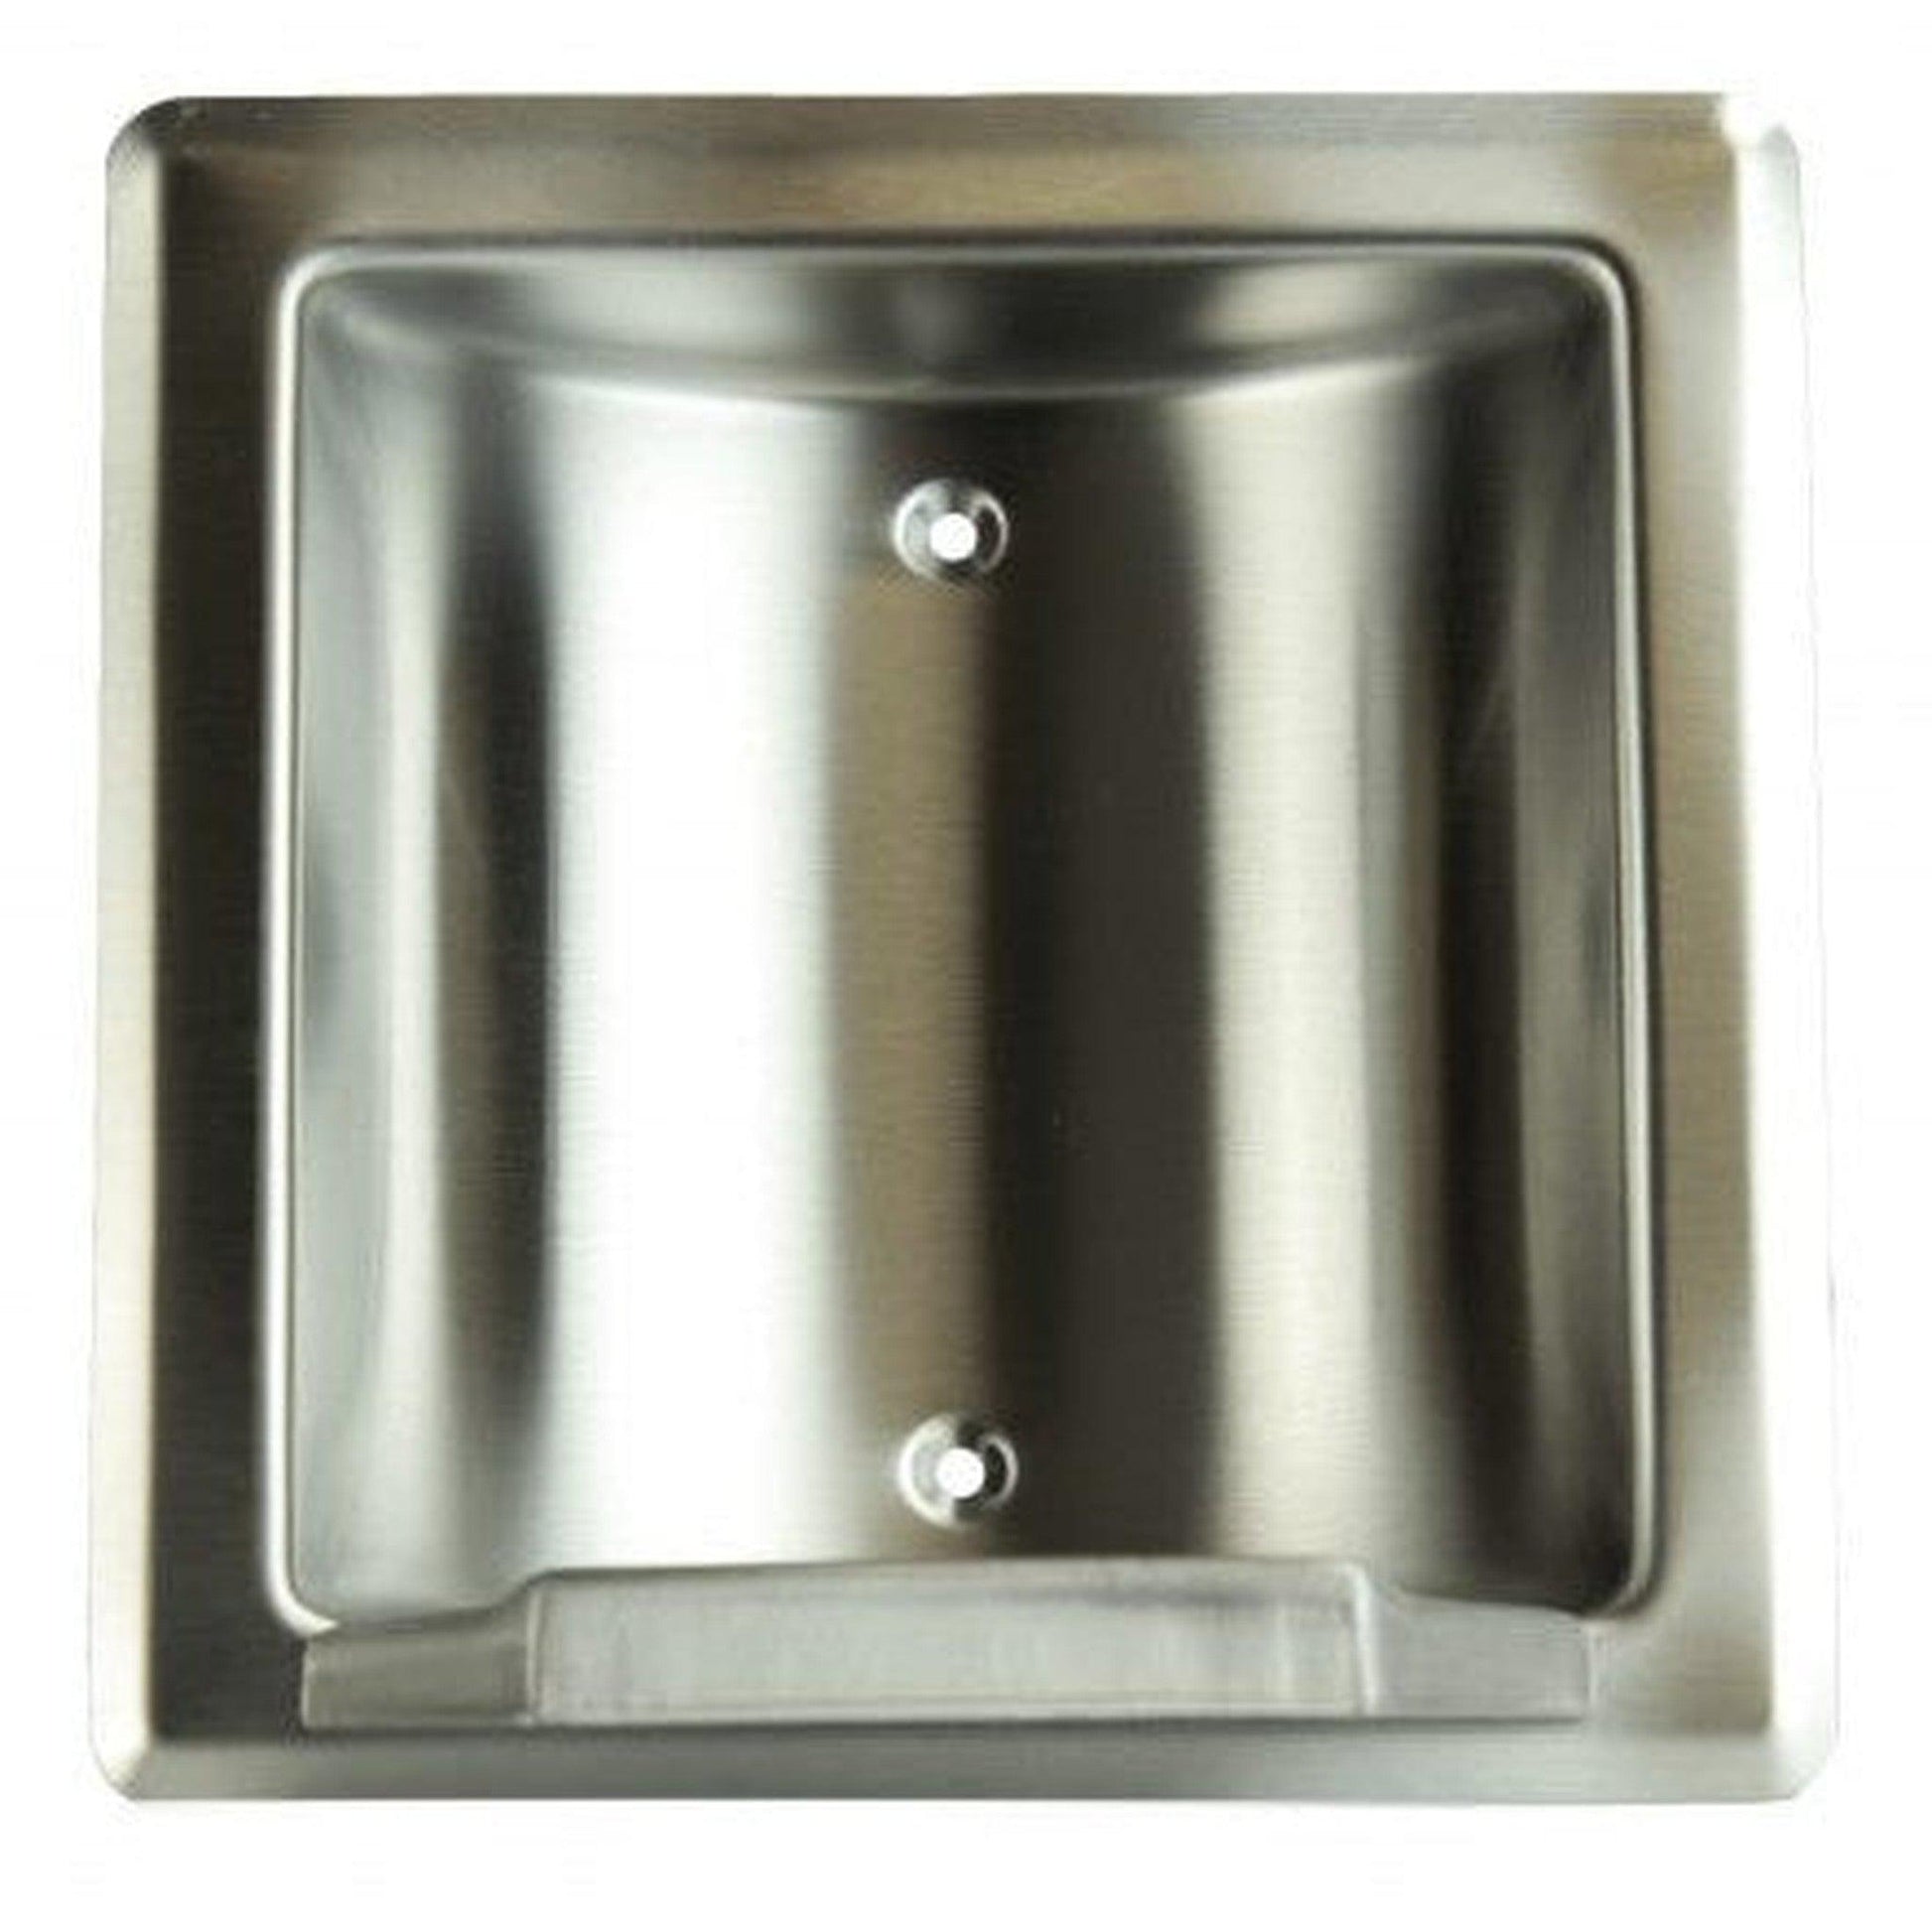 Frost 6.25 x 1.5 x 6.25 Stainless Steel Brushed Washroom Accessories